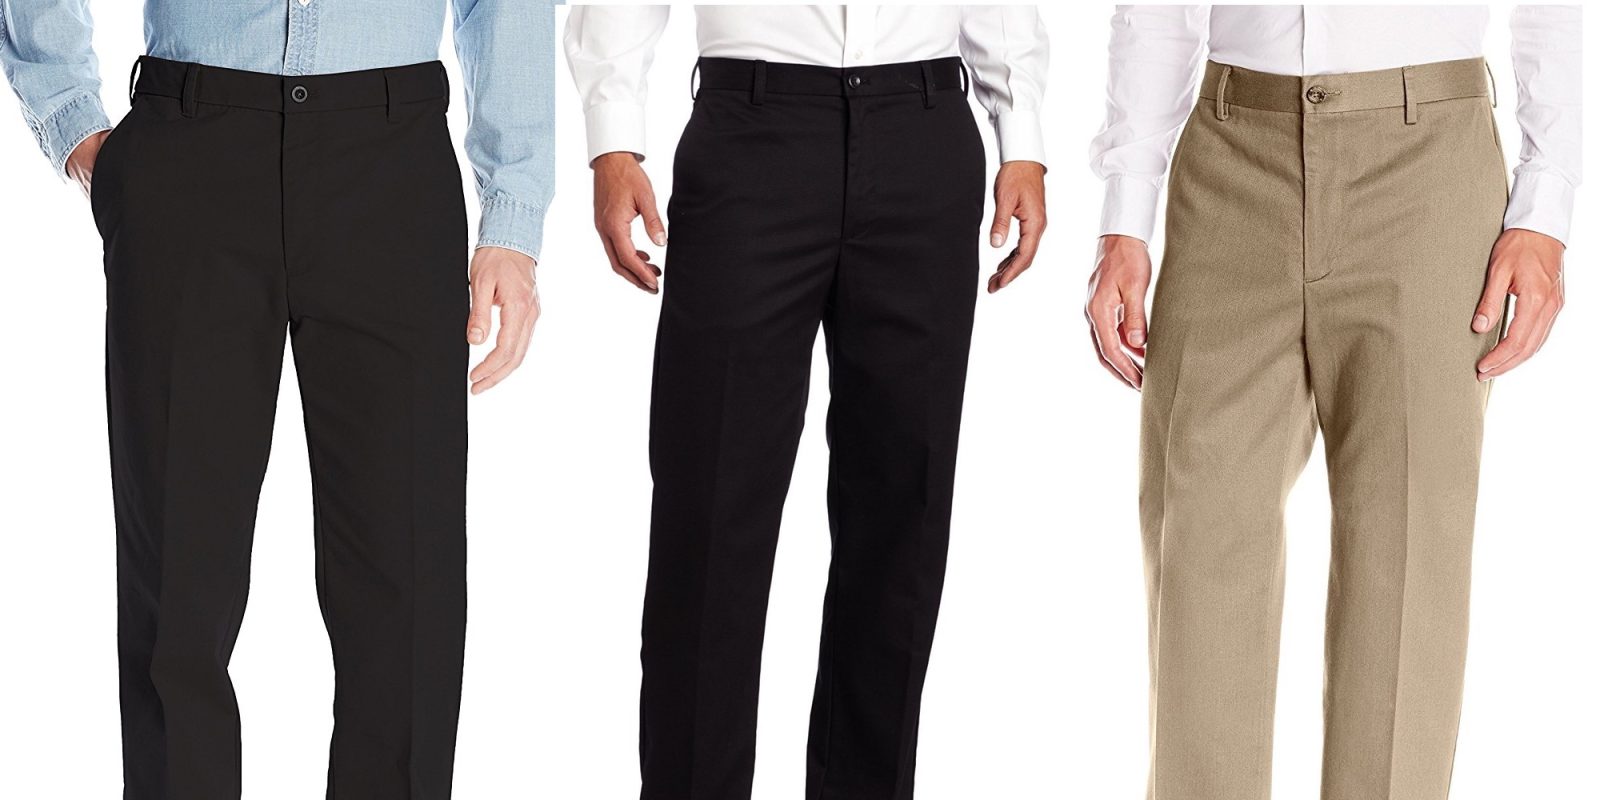 Save up to half-off men's pants at Amazon today from $19 Prime shipped ...